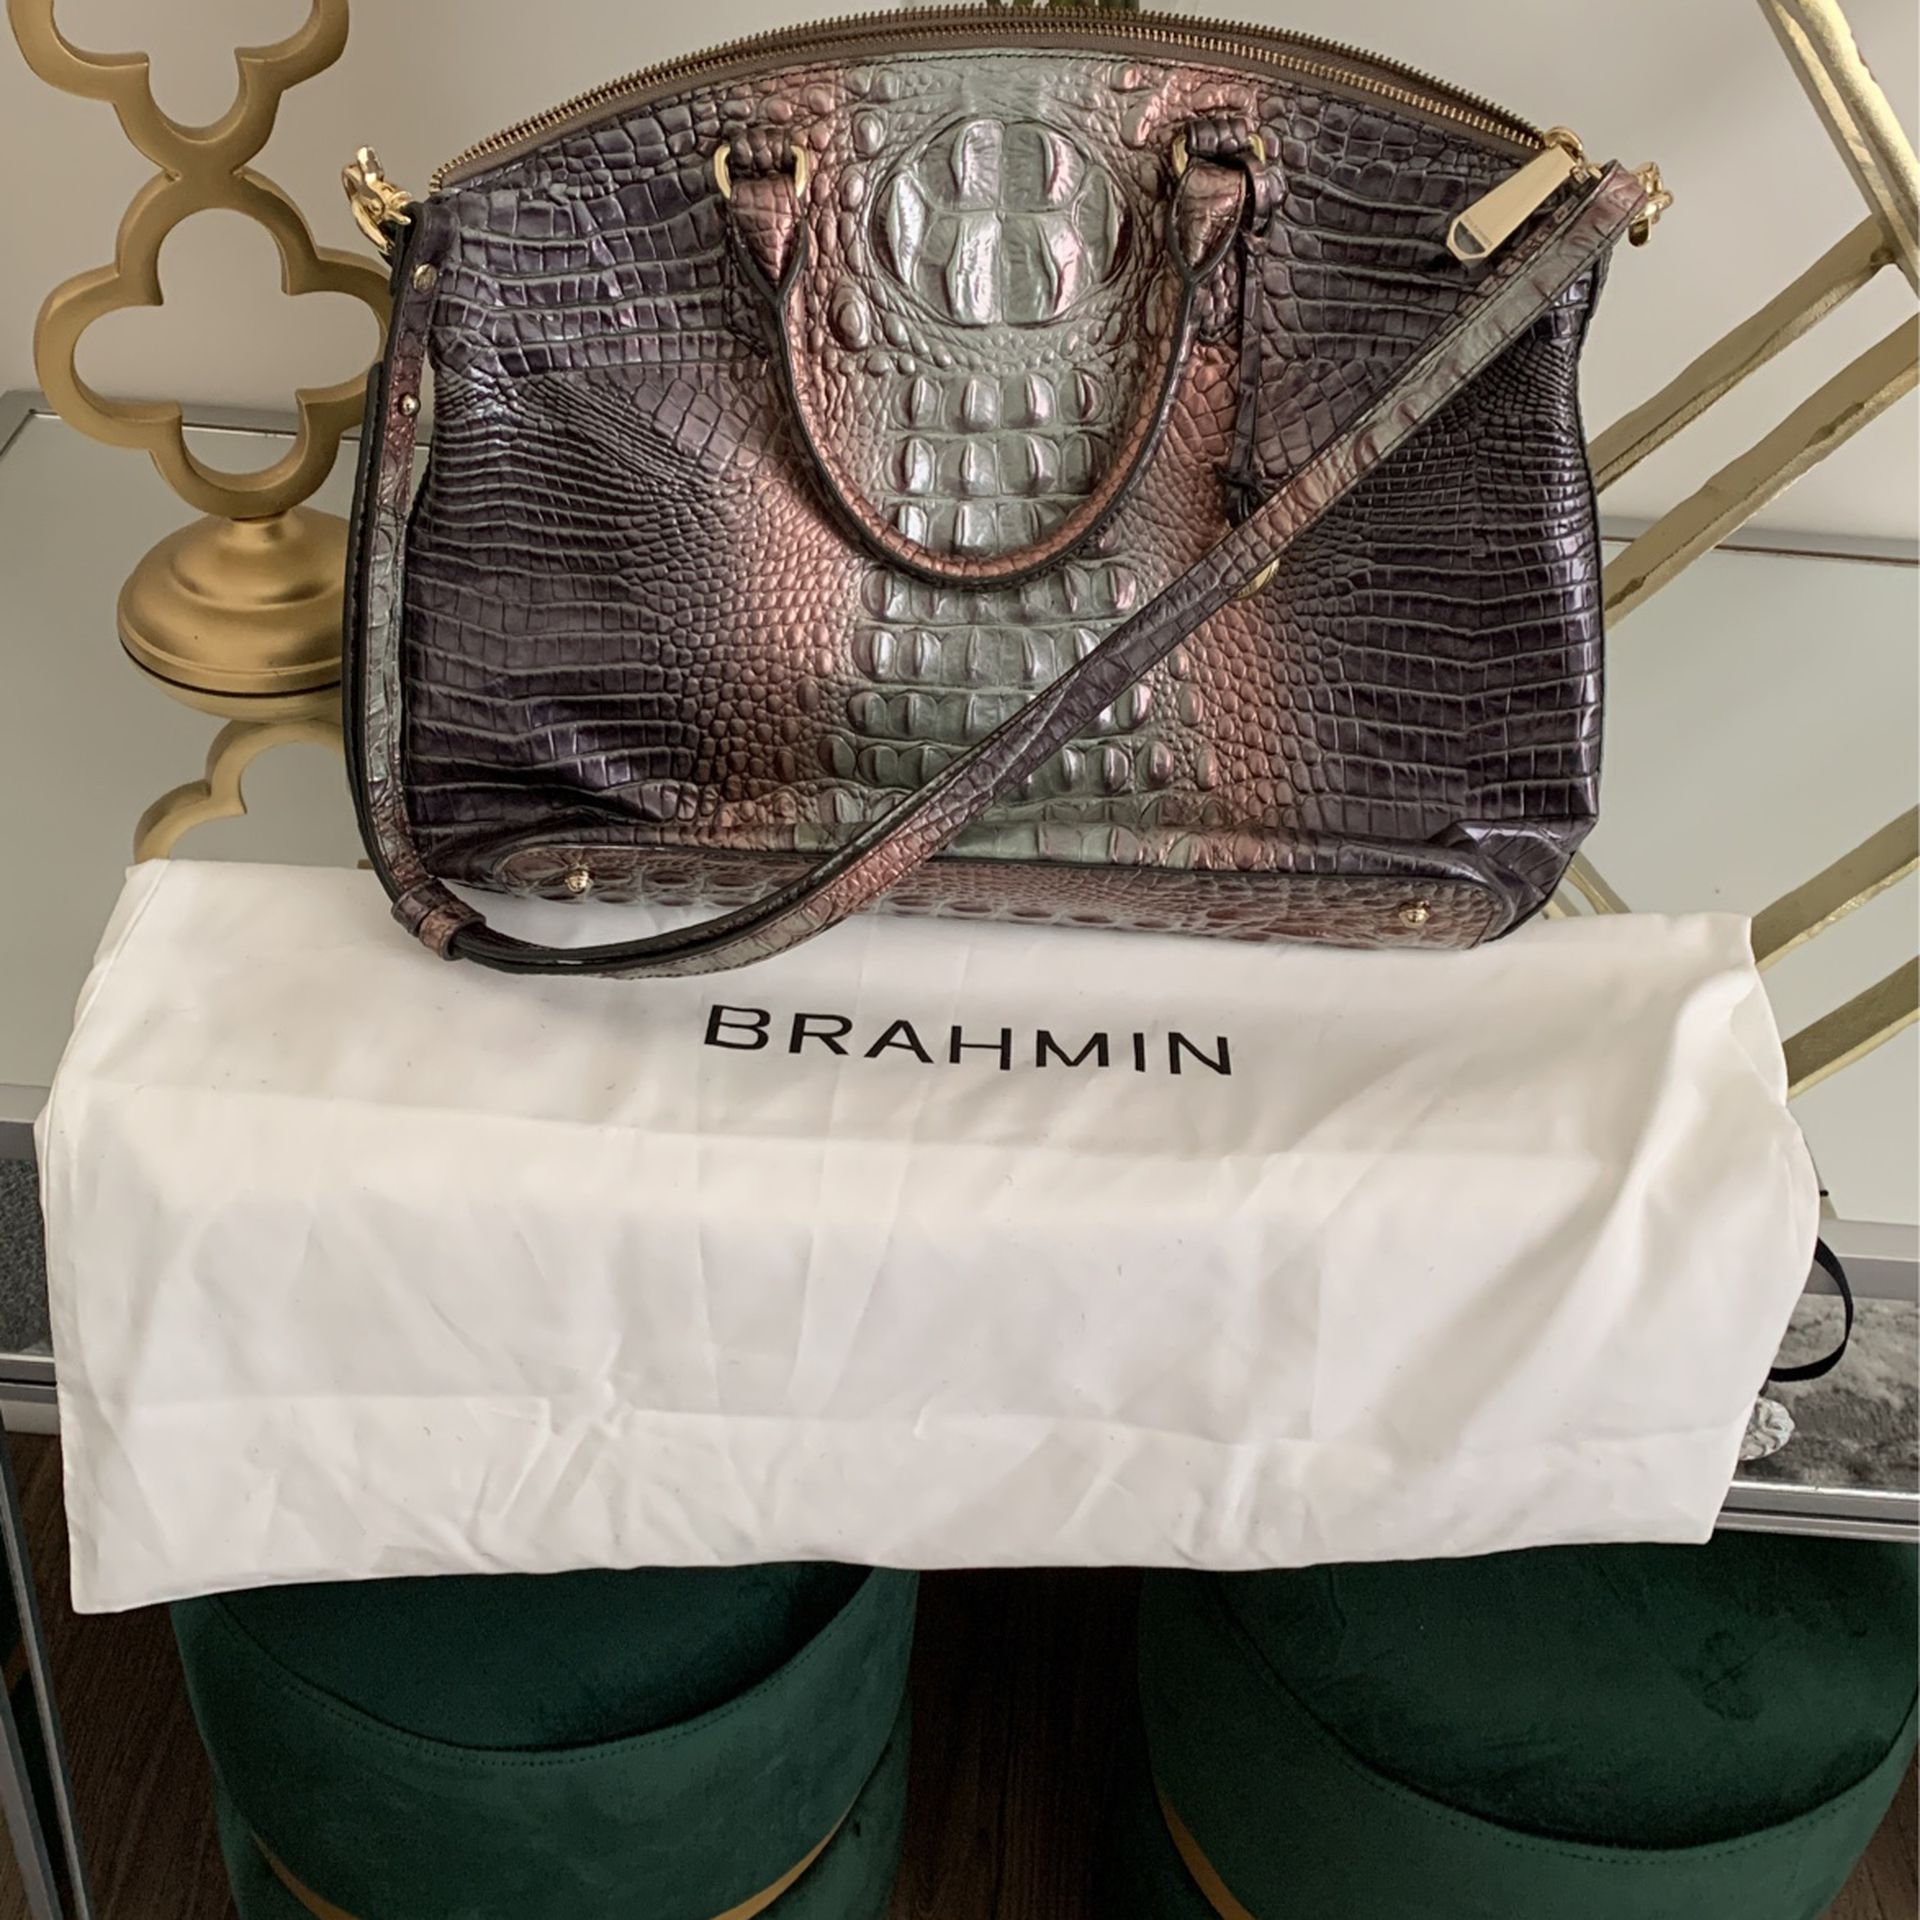 Authentic Brahmin Handbag for Sale in Charlotte, NC - OfferUp